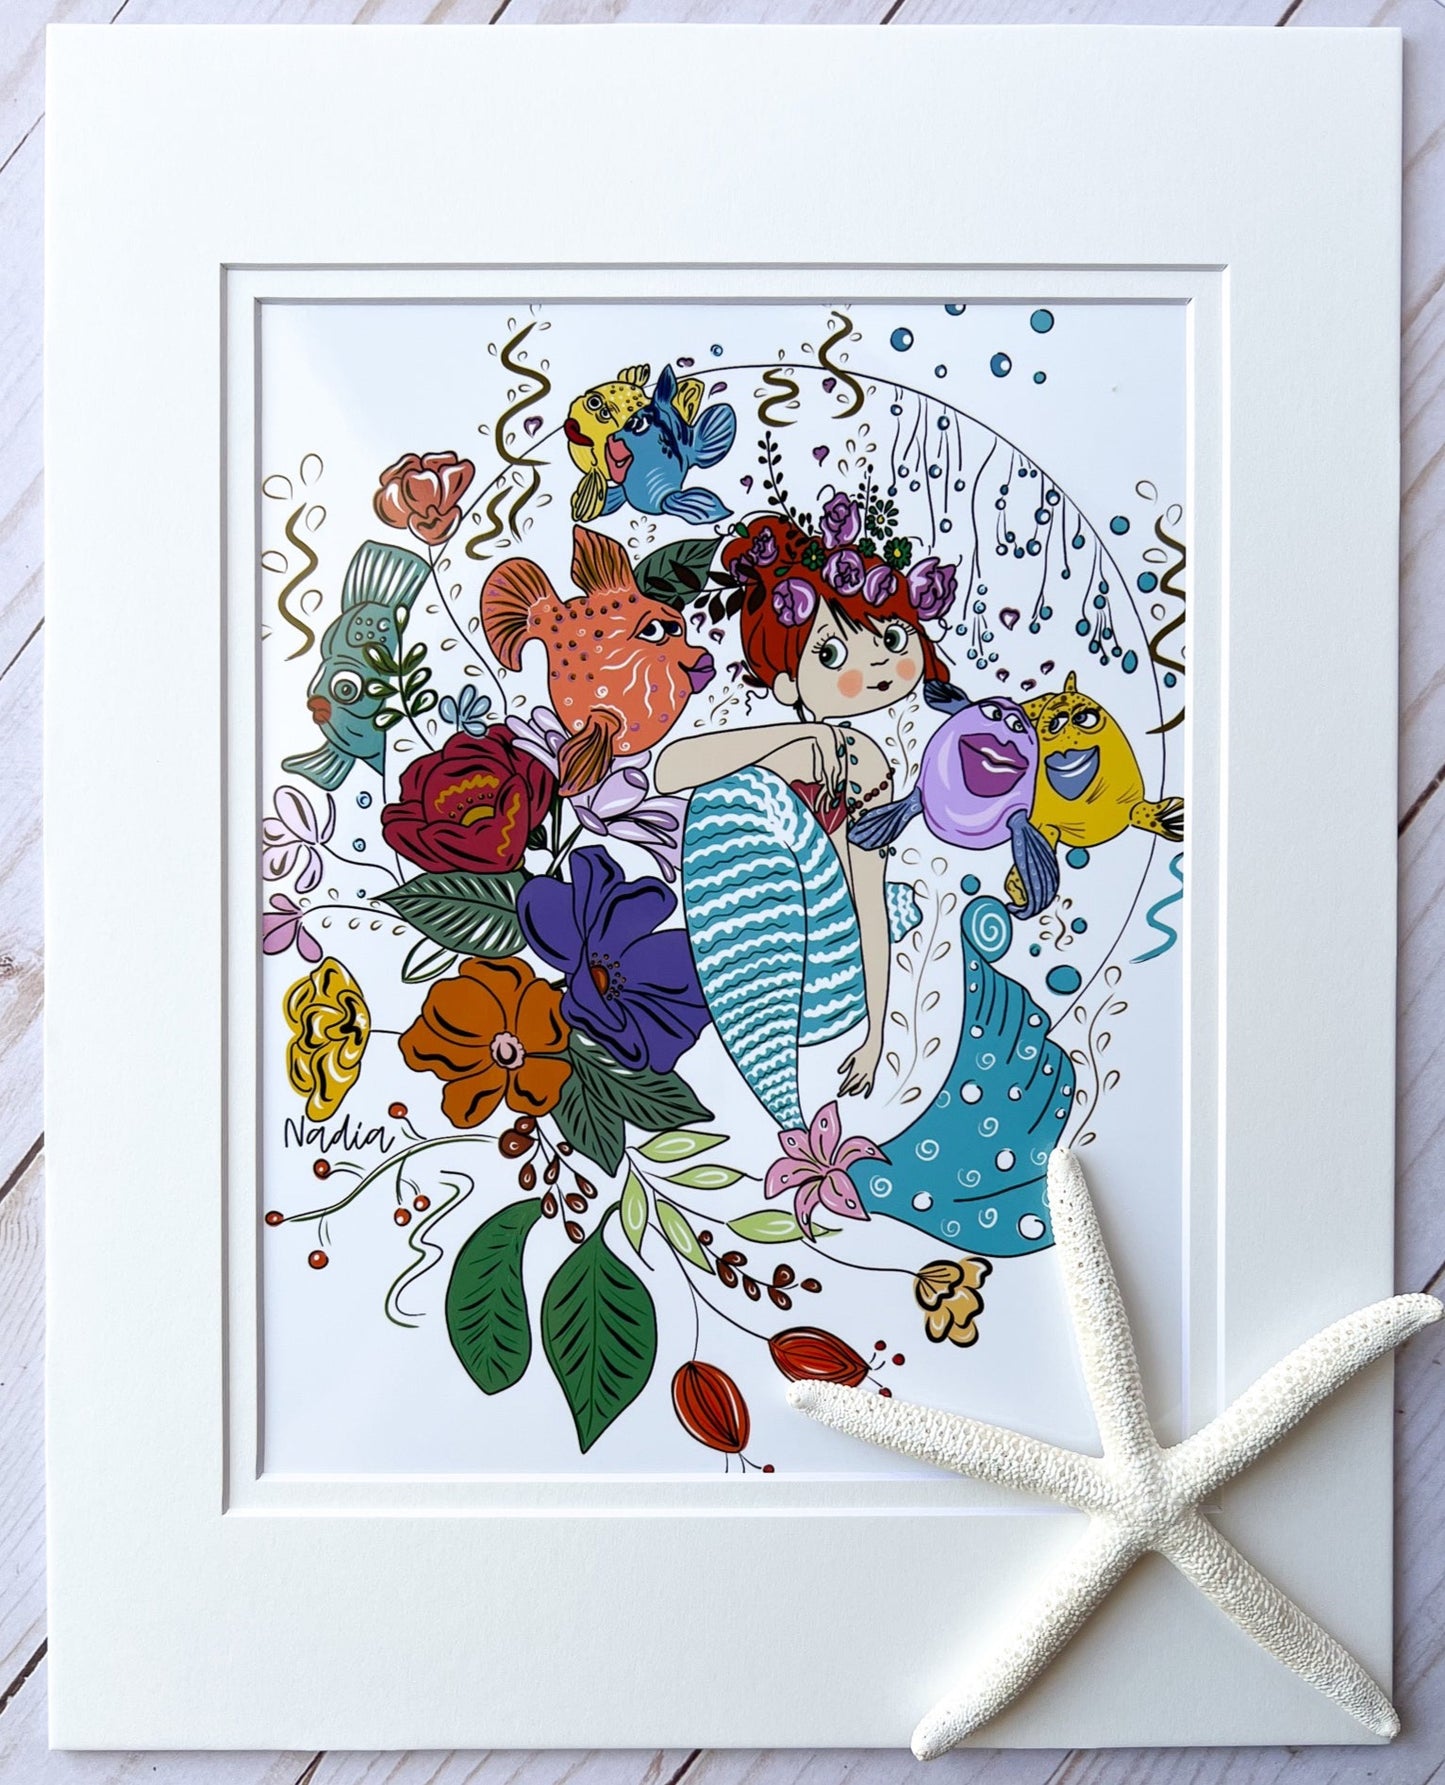 Cute Mermaid and funny fish floral illustration art print matted.  Mermazing drawing by Nadia Watts. Wall decor for girl's bedroom, bathroom, or nursery. Gift for a mermaid fan